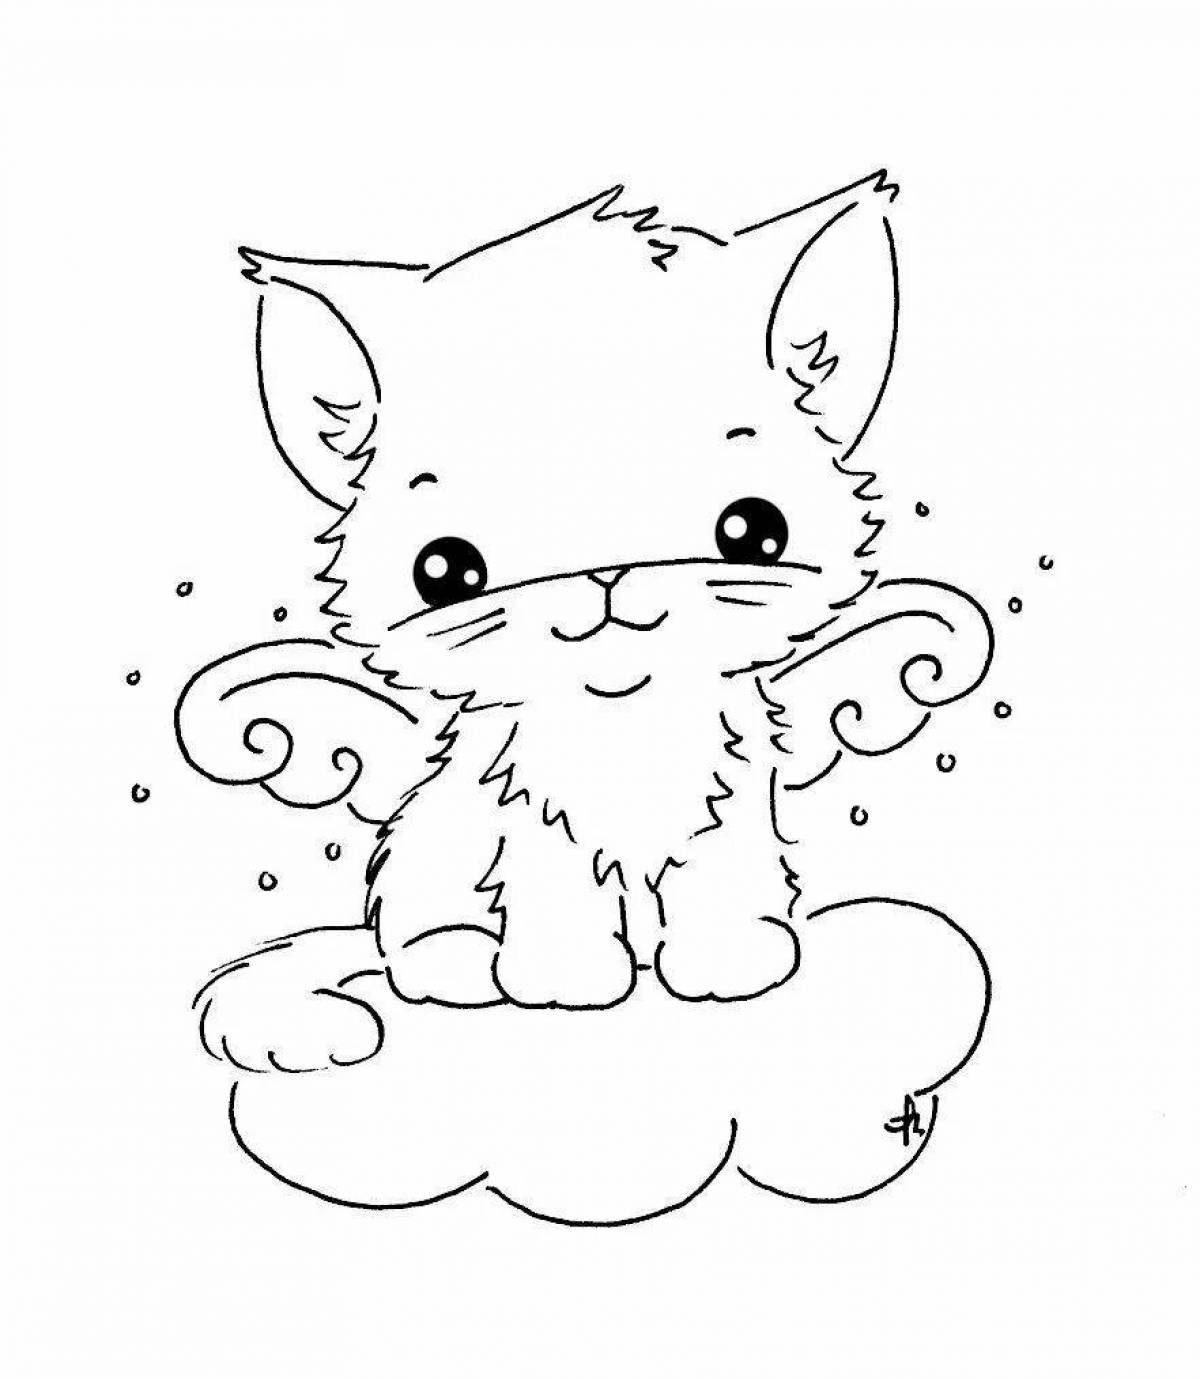 Quirky cute kitty coloring book